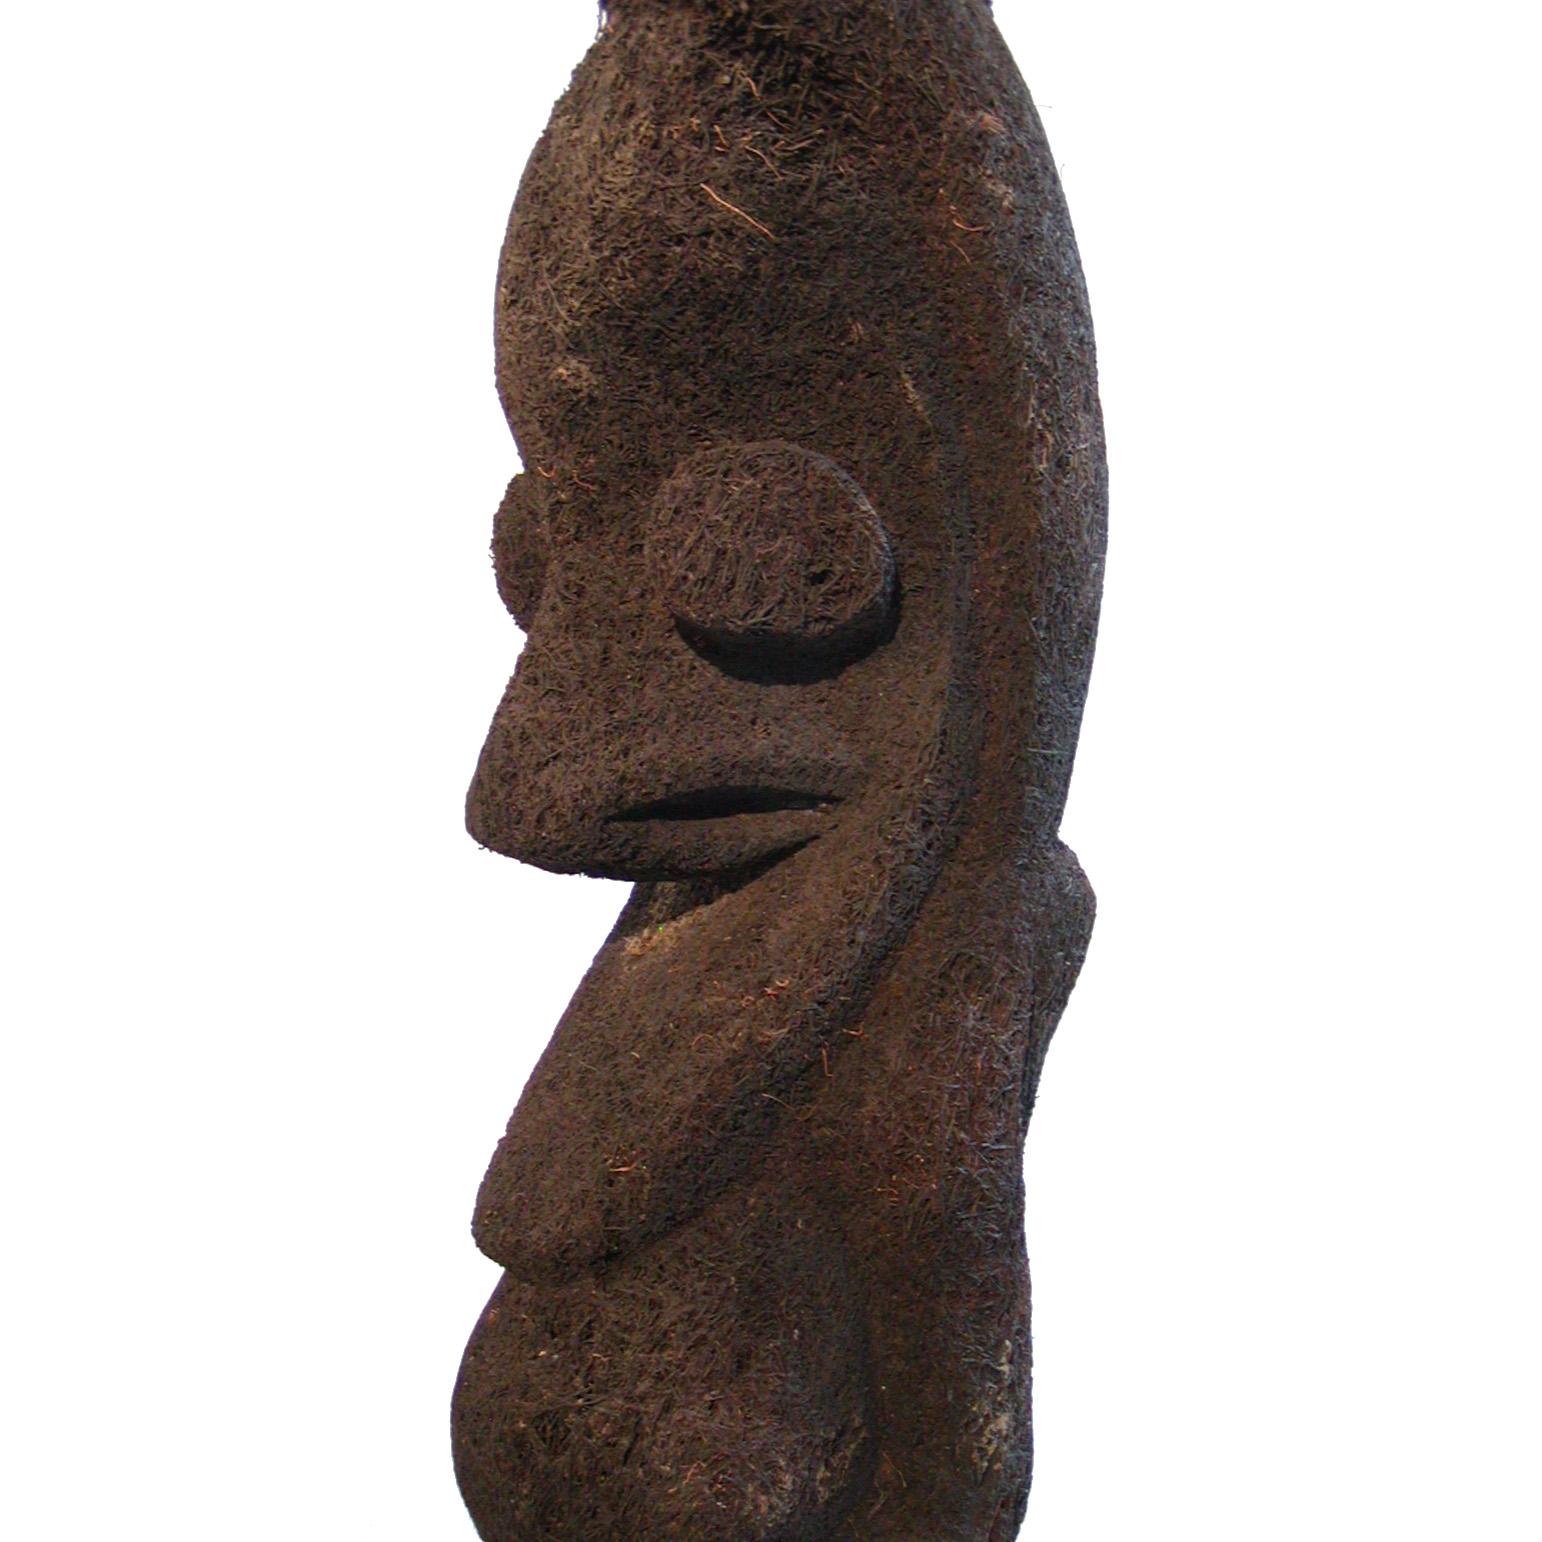 Vanuatu Fernwood Grade Ritual Figure, Ambrym Island. A sculpture carved from a solid section of the fibrous trunk of a tree fern composed of aerial roots surrounding a woody core, in the distinctive Vanuatu human form of a large headed male